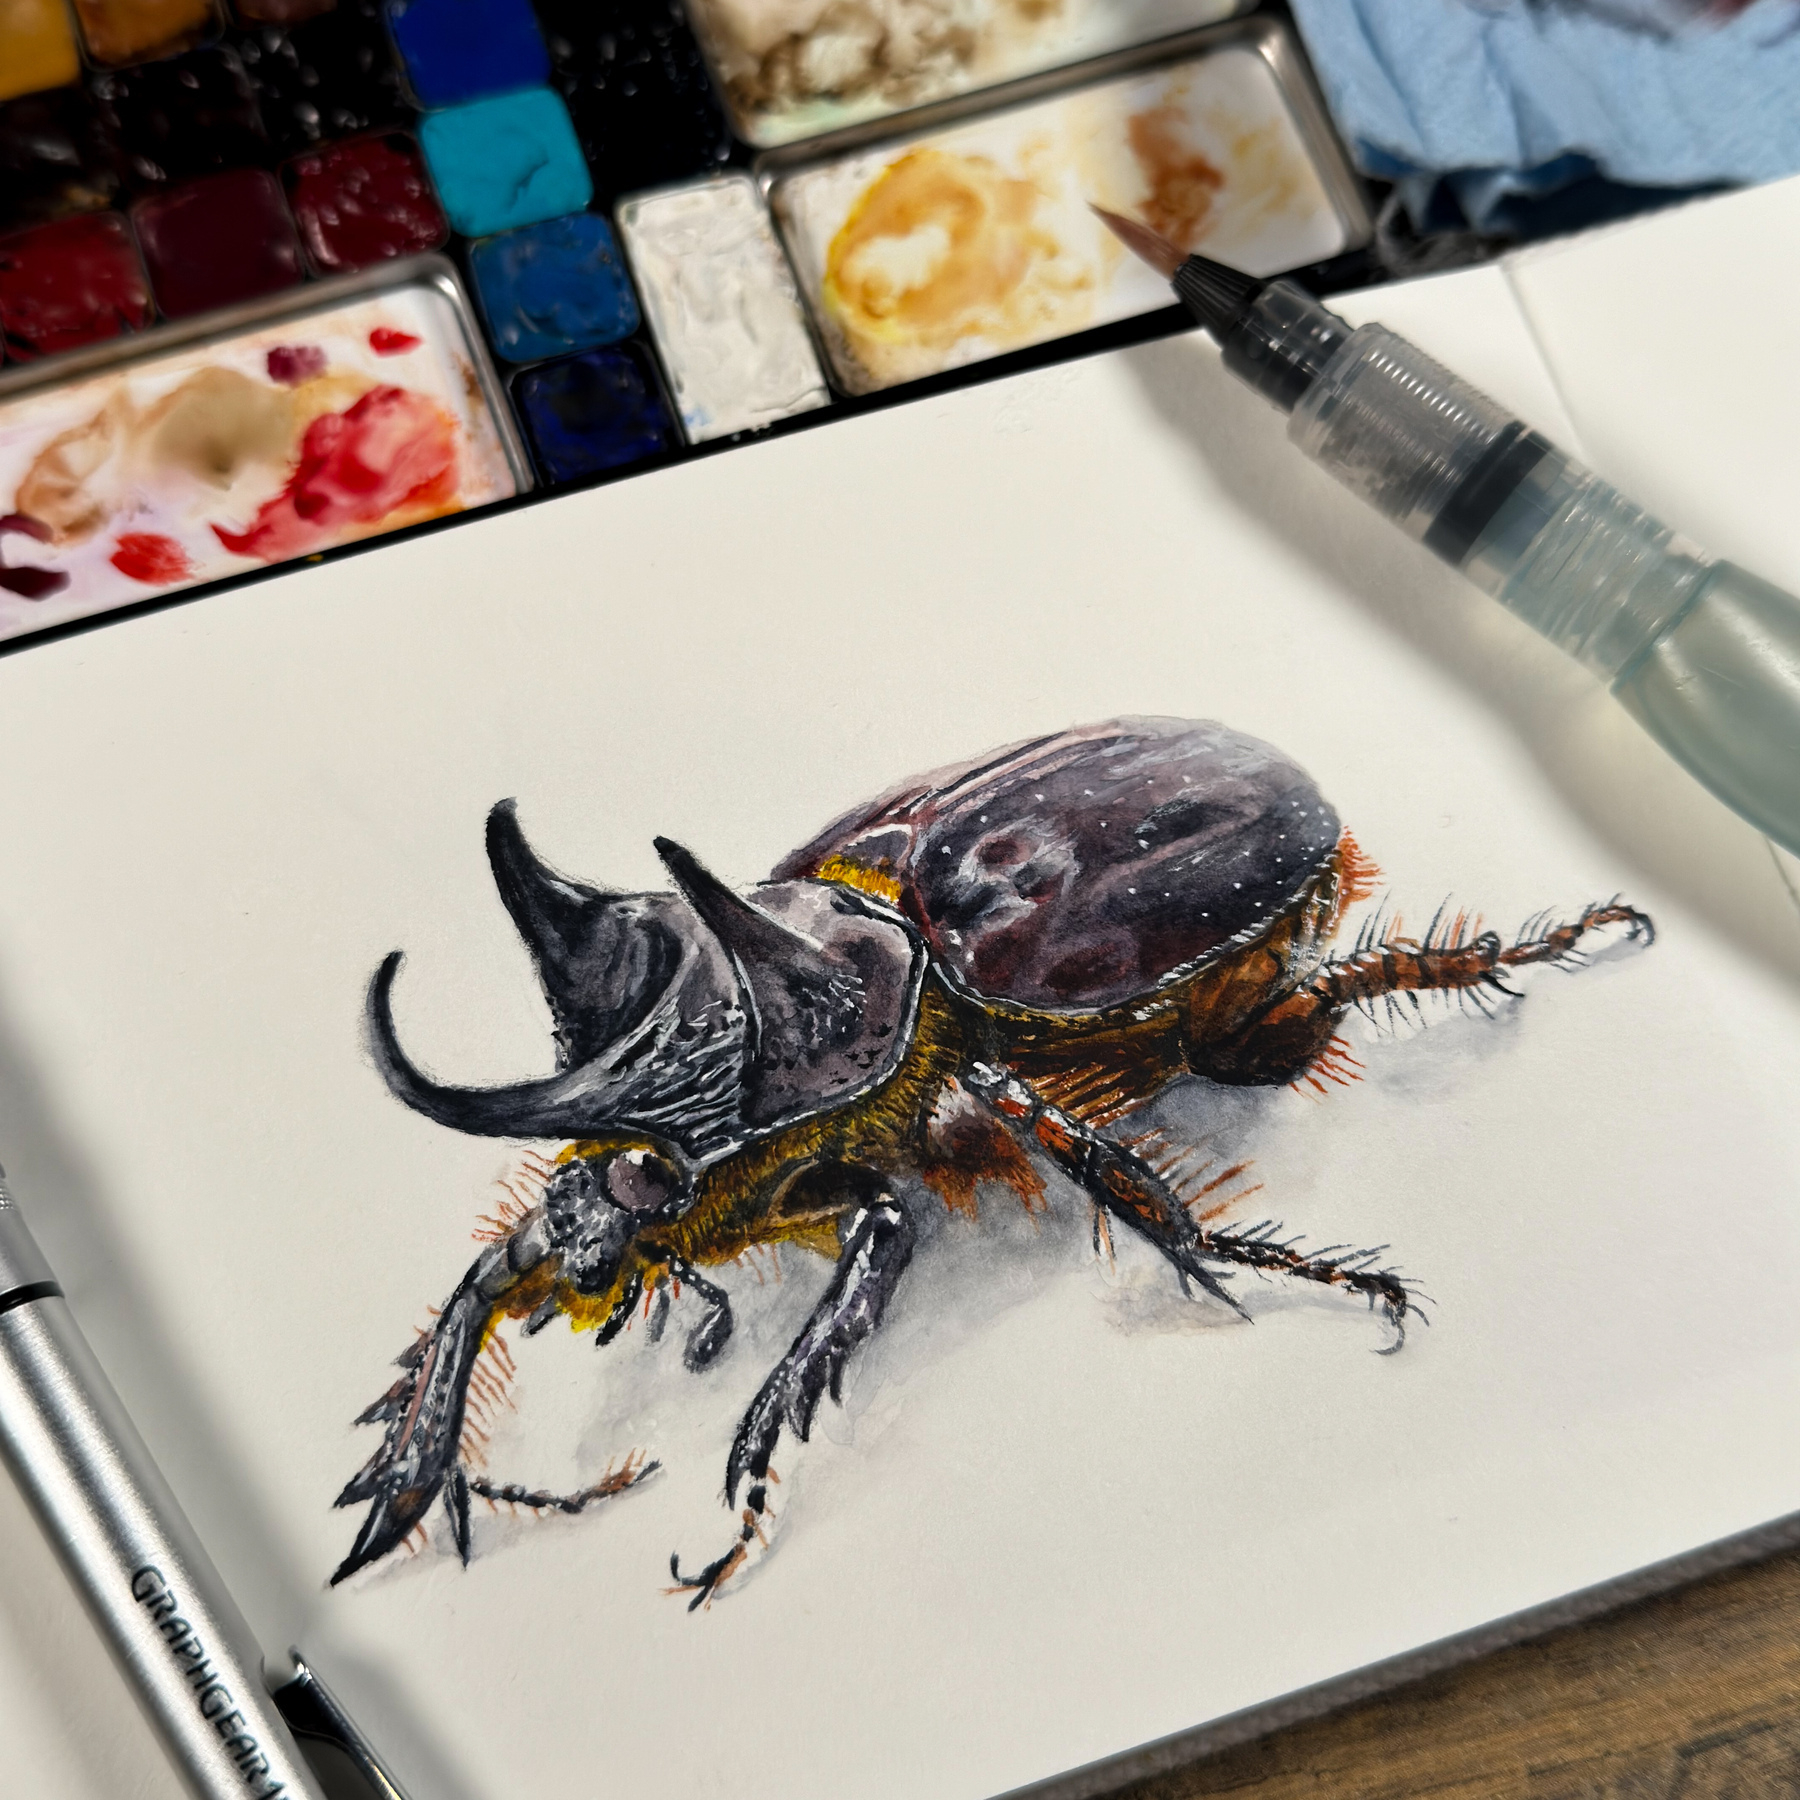 Watercolor illustration of a detailed box beetle on a white sketchbook page, accompanied by a painter's palette with a variety of colors, a water brush pen, and a pencil.